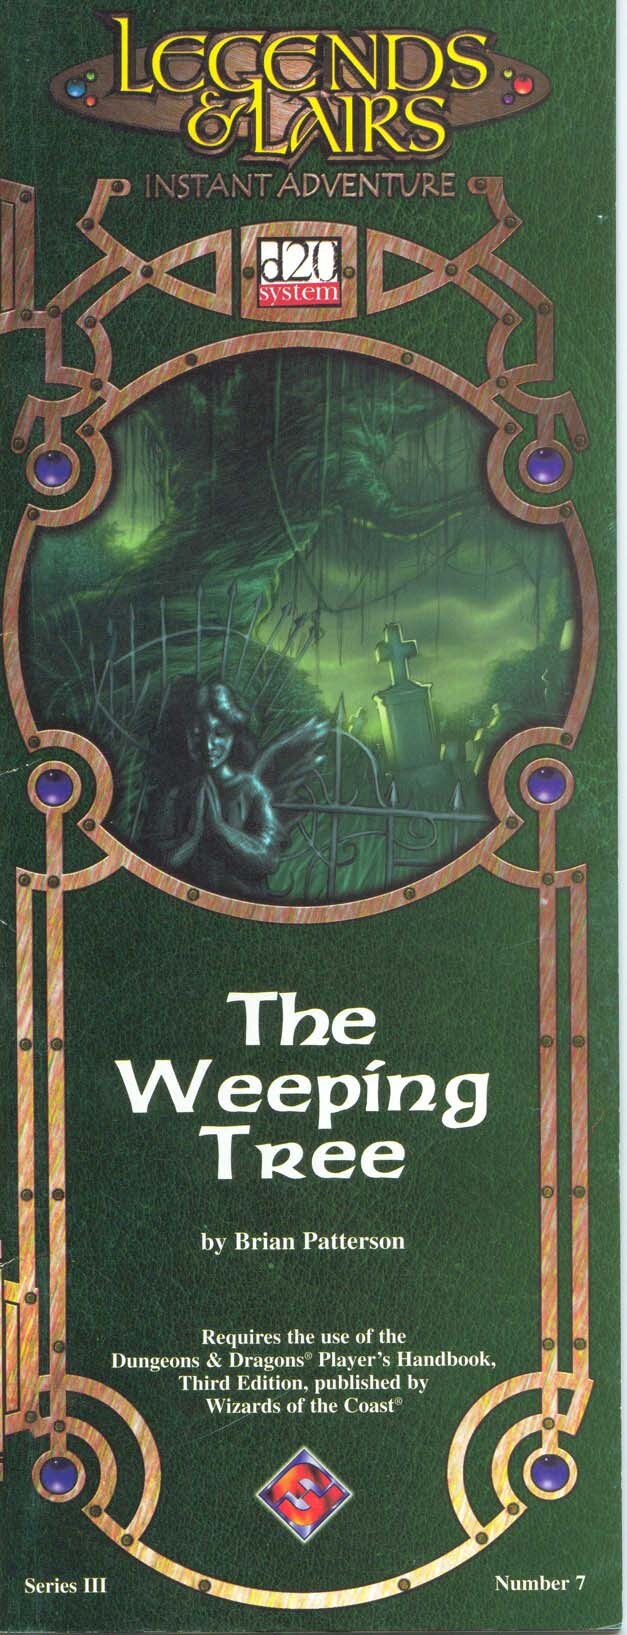 The Weeping Tree